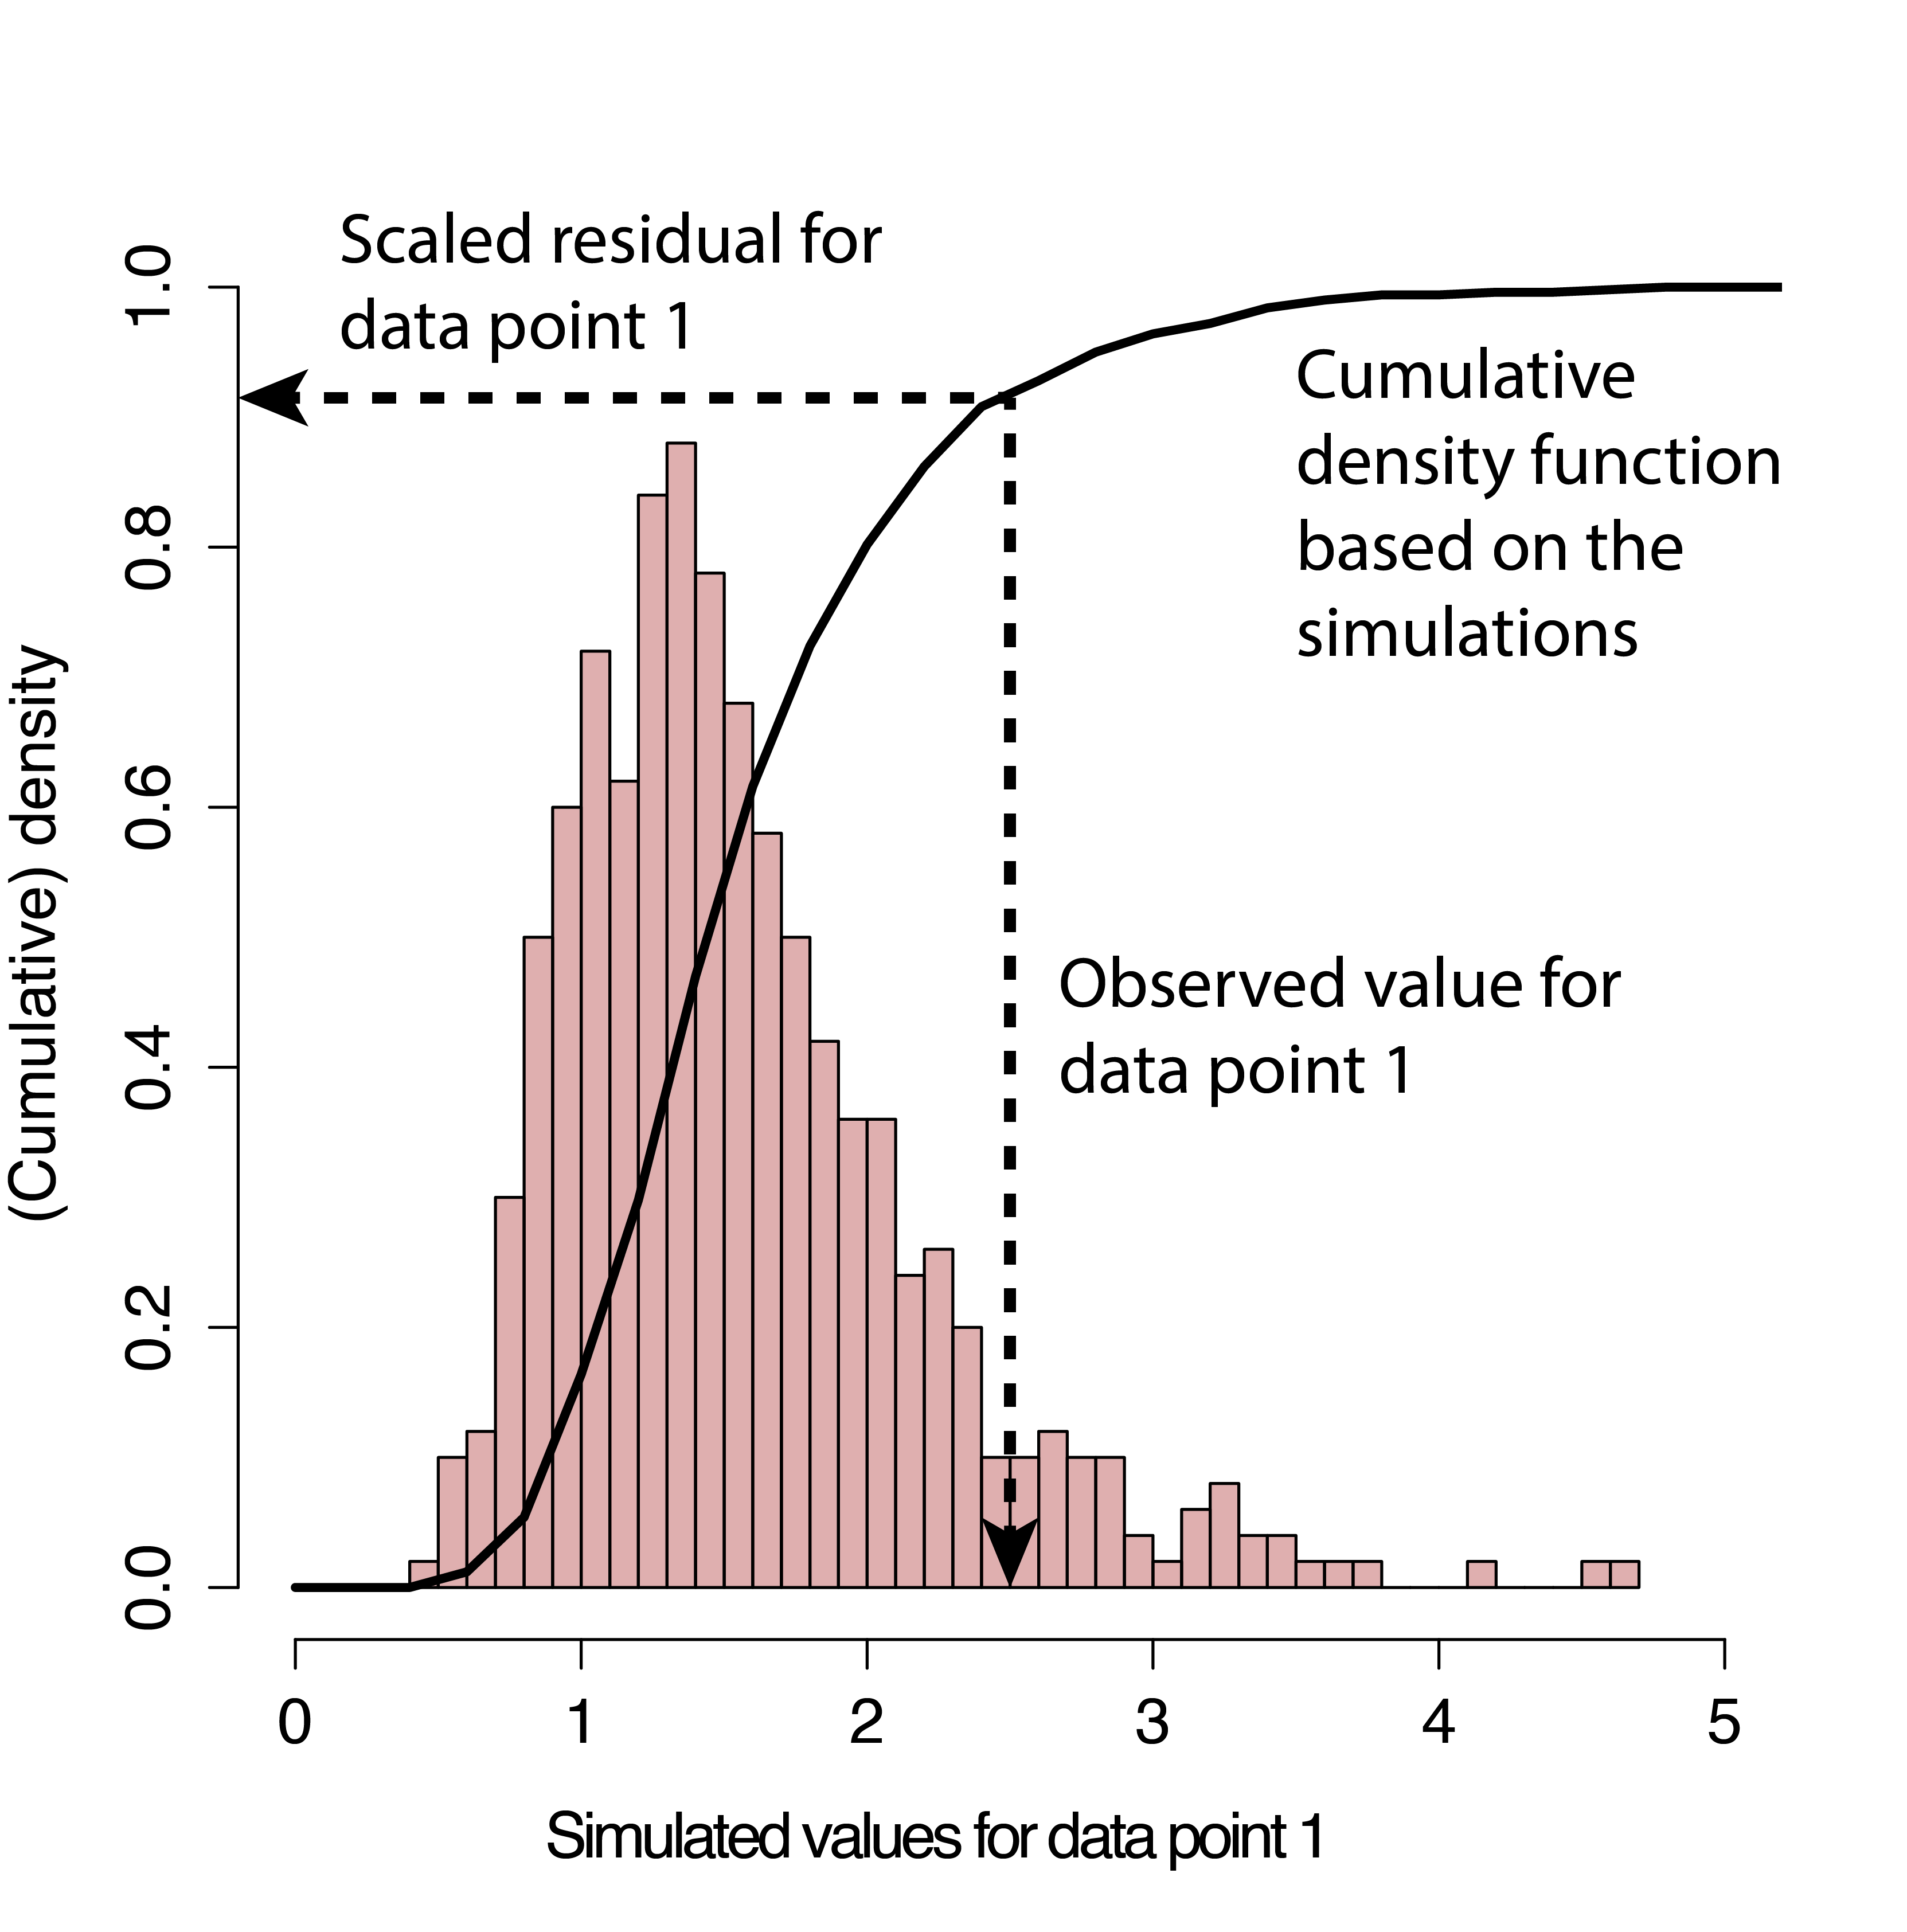 Simulation-based process for creating standardized residuals via the DHARMa package (Hartig, 2021). Figure is copied from the DHARMa vignette.